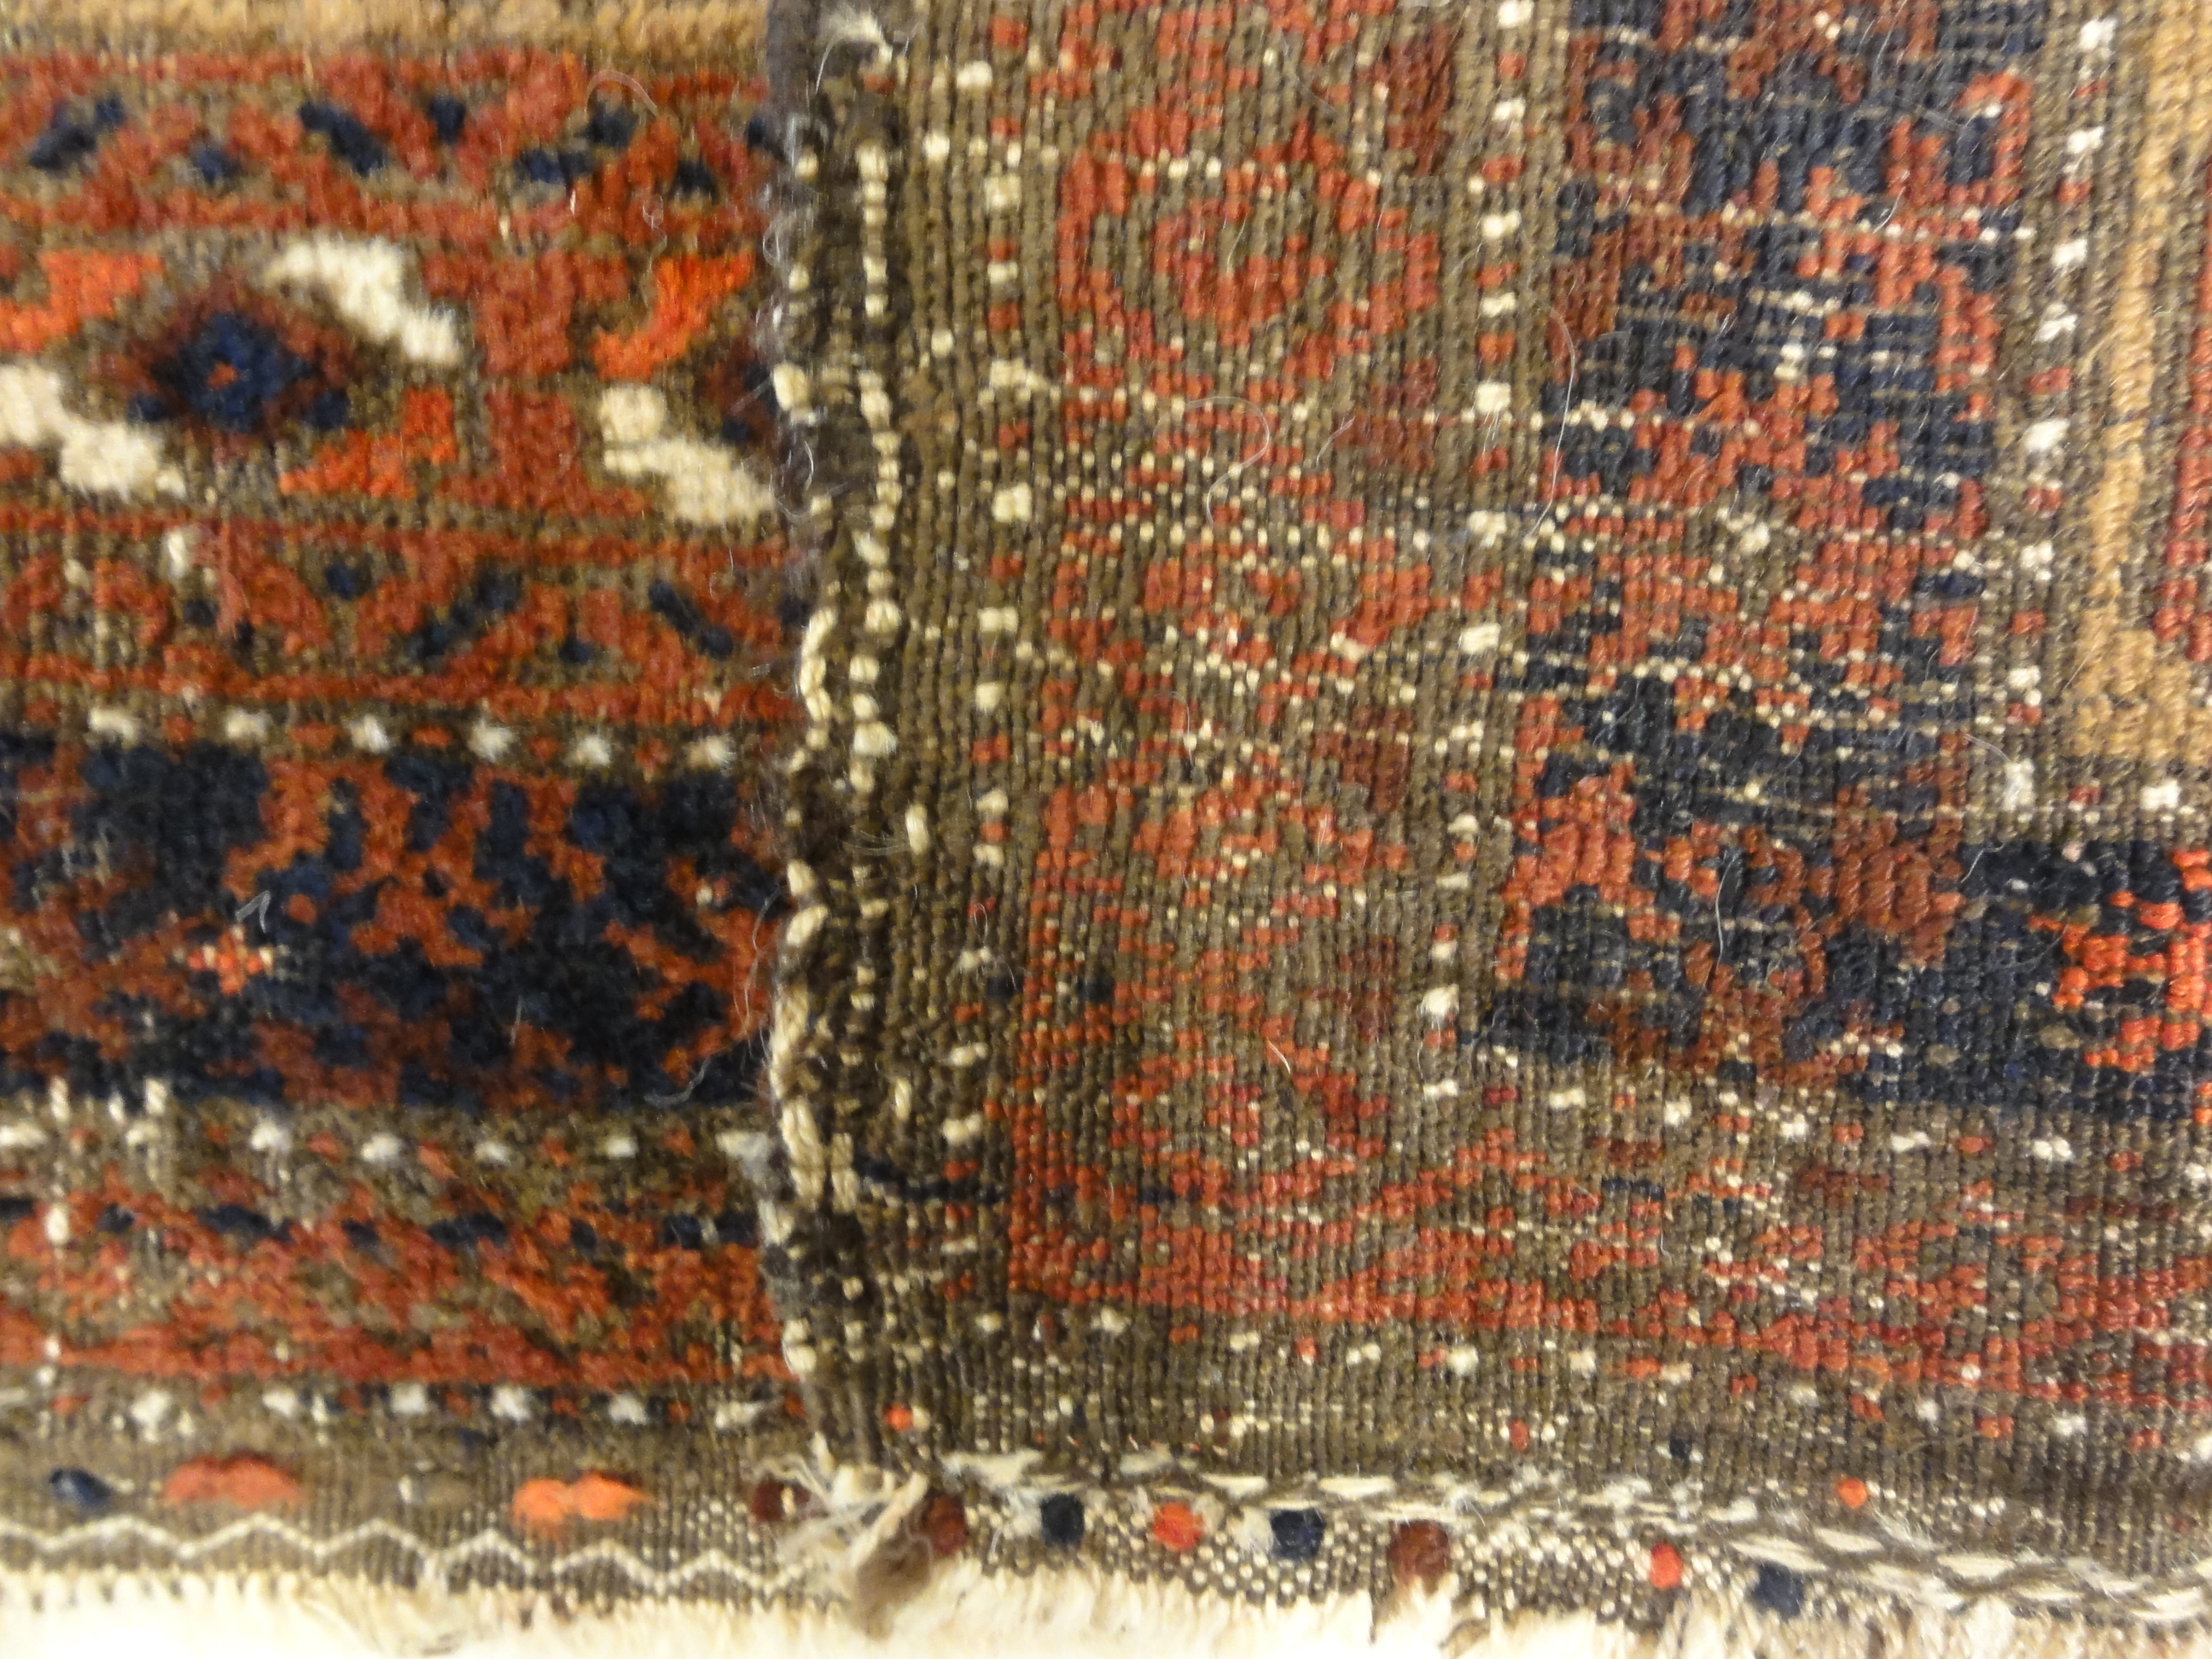 An antique, original Persian Baluch rug. A piece of genuine and authentic carpet art sold at Santa Barbara Design Center. Rugs and More.